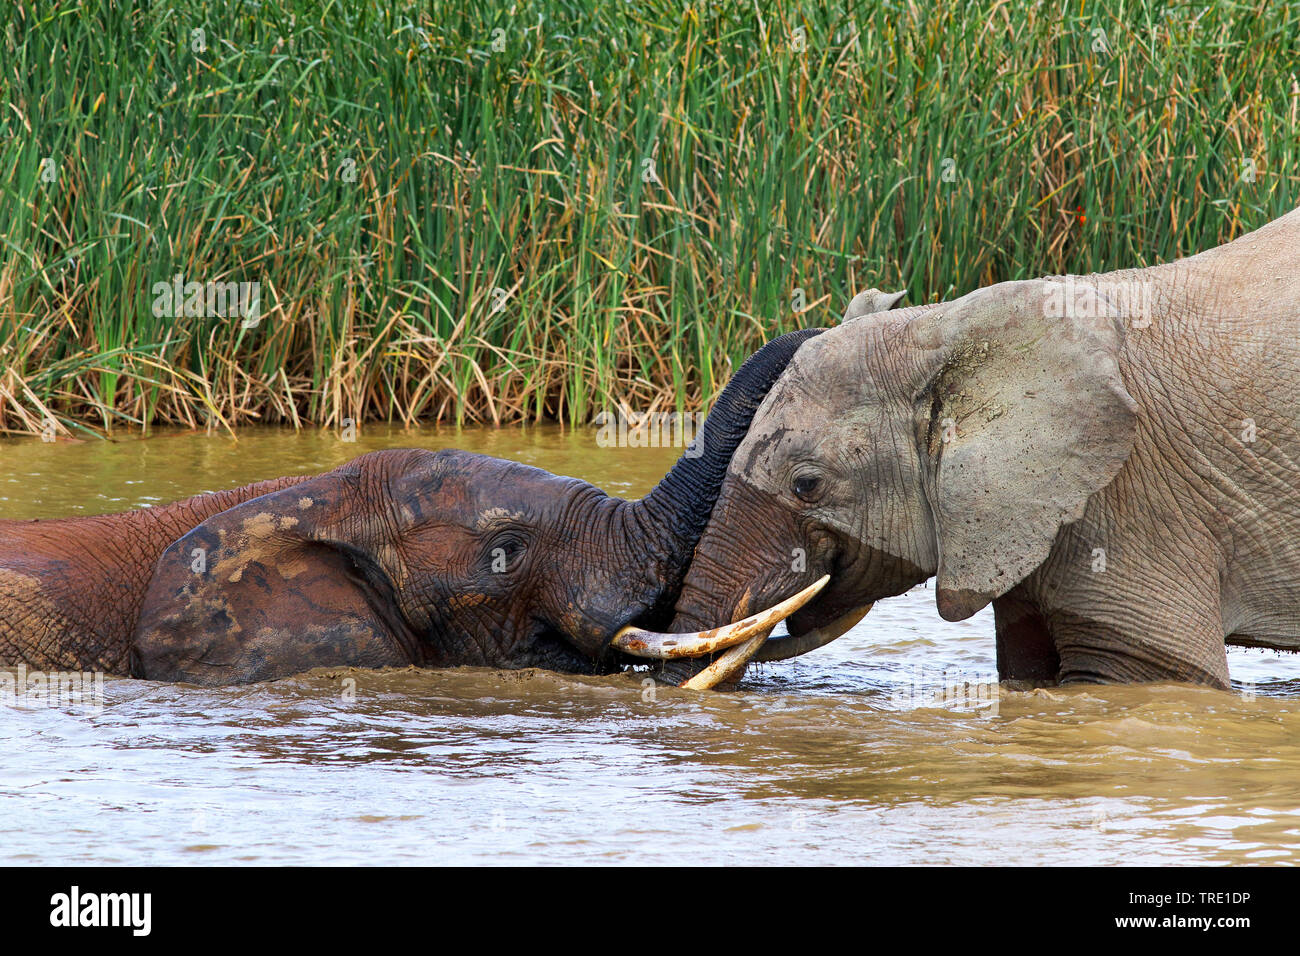 African elephant (Loxodonta africana), in the water fighting bulls, side view, South Africa, Eastern Cape, Addo Elephant National Park Stock Photo